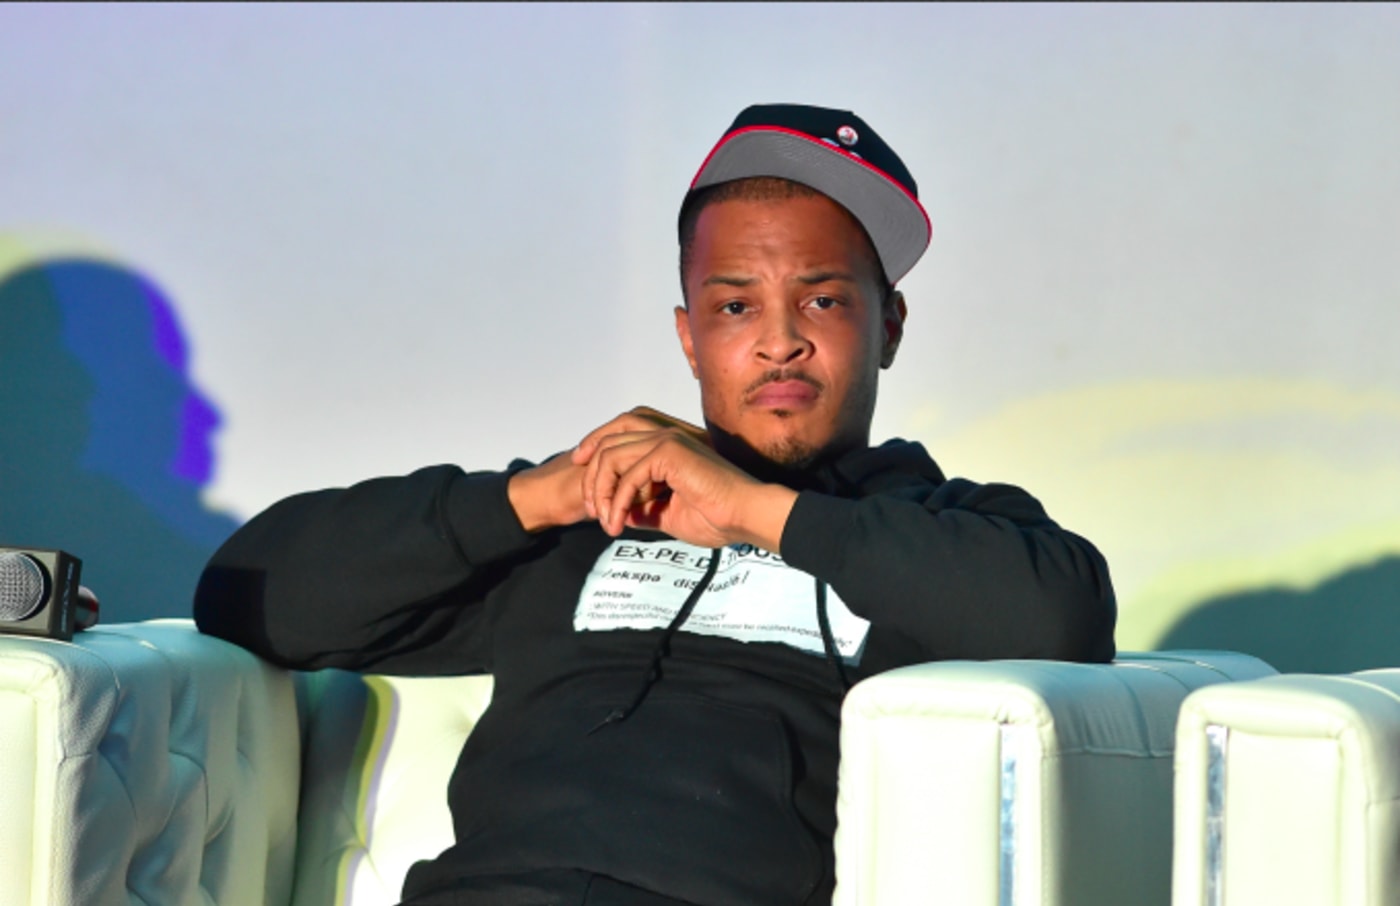 T.I. attends 2019 A3C Festival & conference at Atlanta Convention center